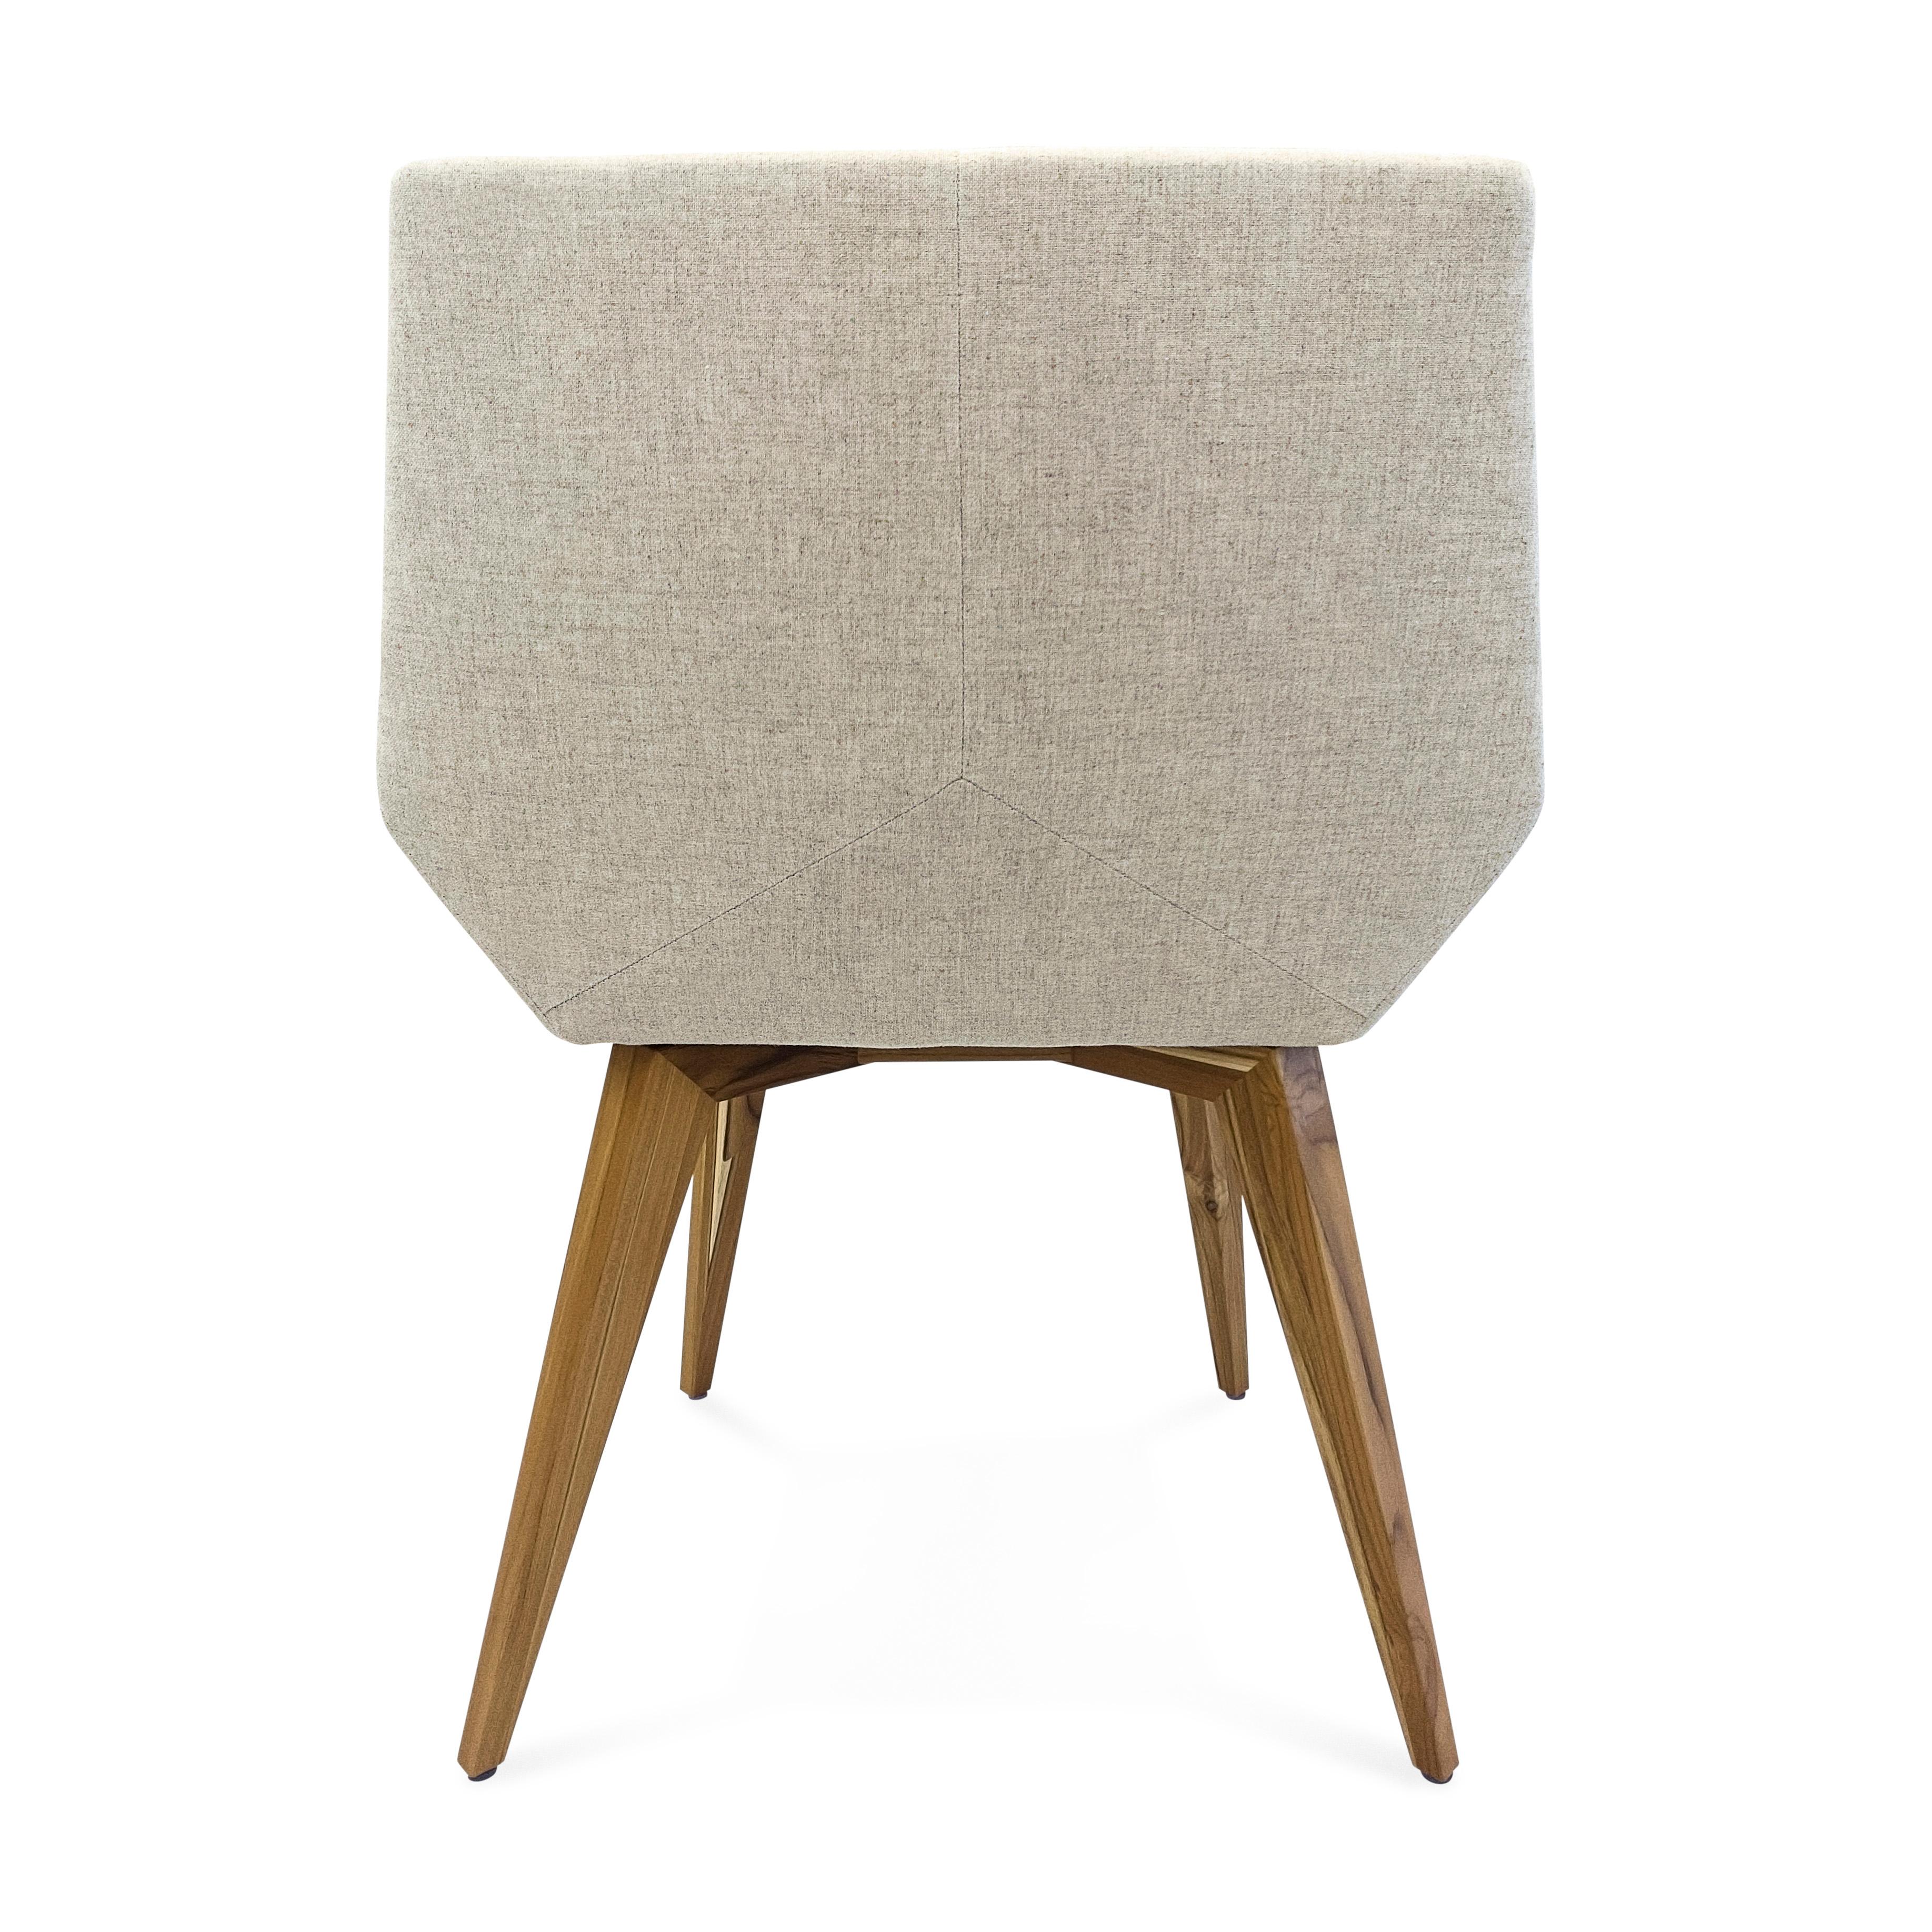 Contemporary Geometric Cubi Dining Chair in Teak Wood Finish with Oatmeal Fabric Seat For Sale